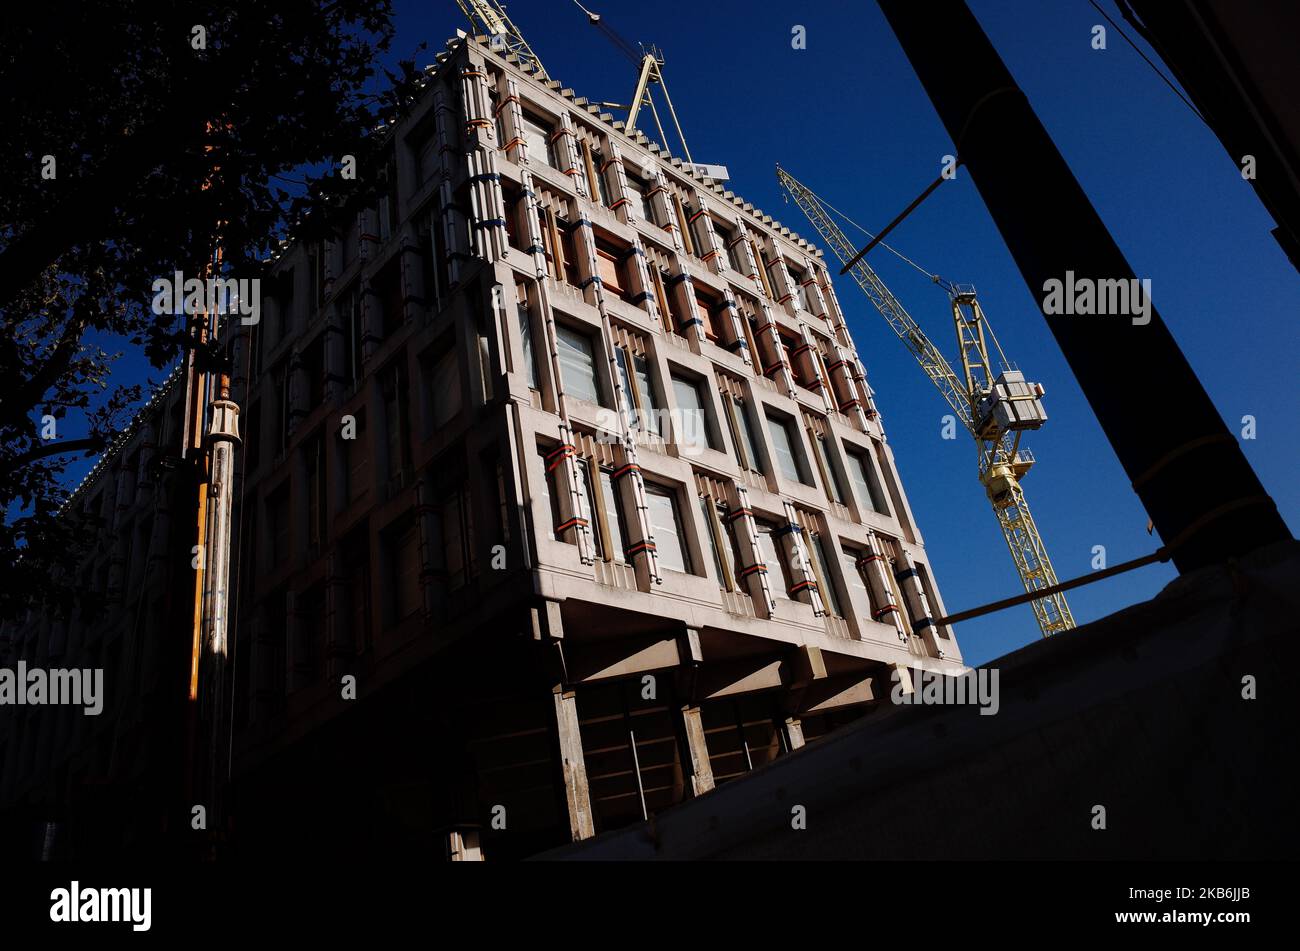 The former US Embassy, now a construction site as it is converted into a luxury Rosewood hotel, stands in Grosvenor Square in London, England, on September 21, 2019. The new US Embassy, in Nine Elms, opened in January 2018. (Photo by David Cliff/NurPhoto) Stock Photo